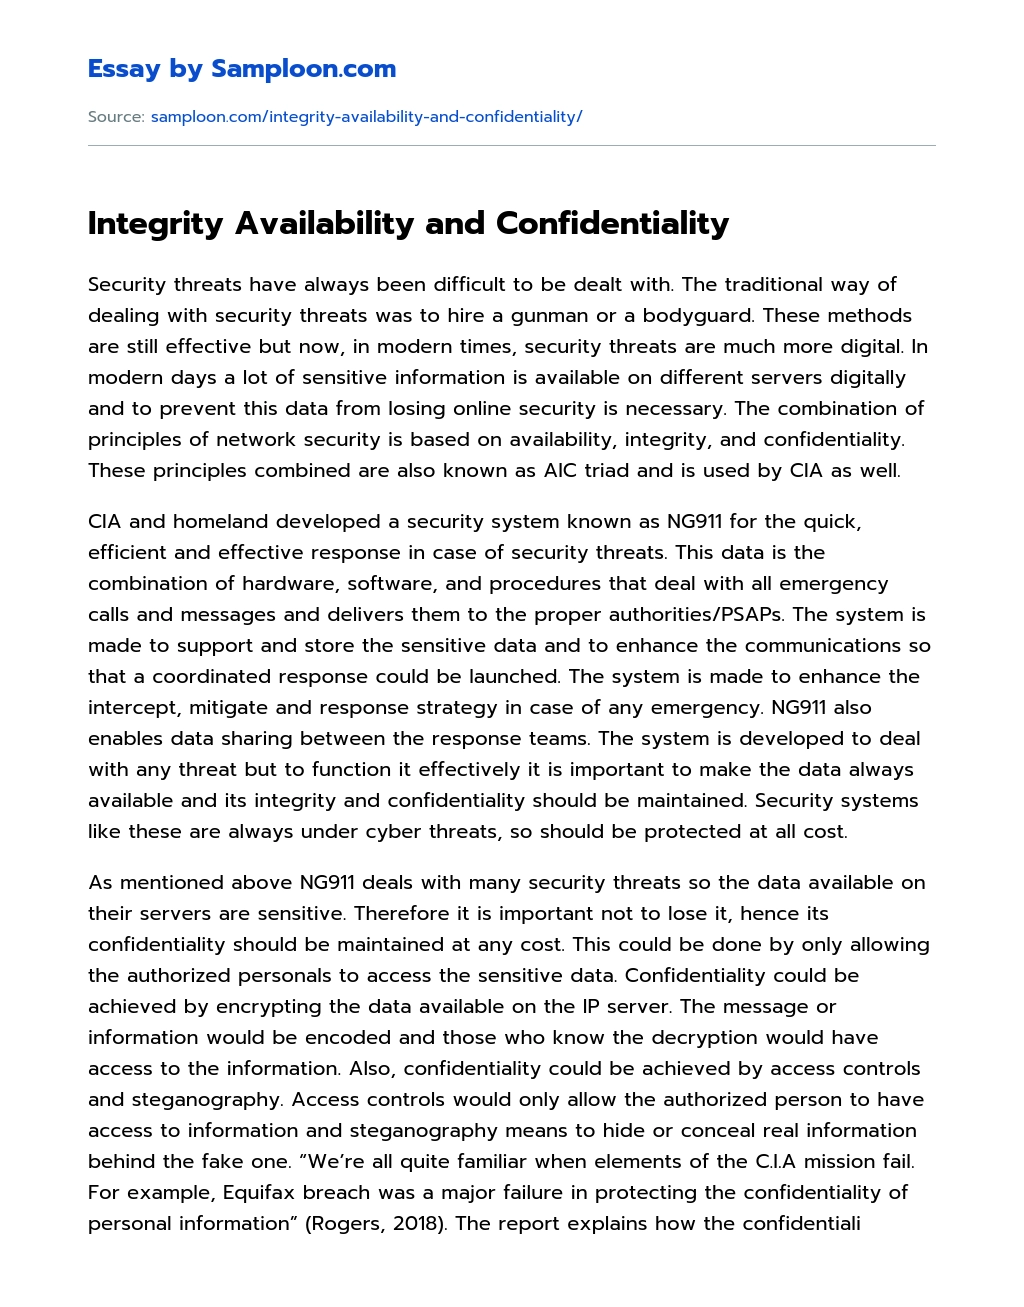 Integrity Availability and Confidentiality essay